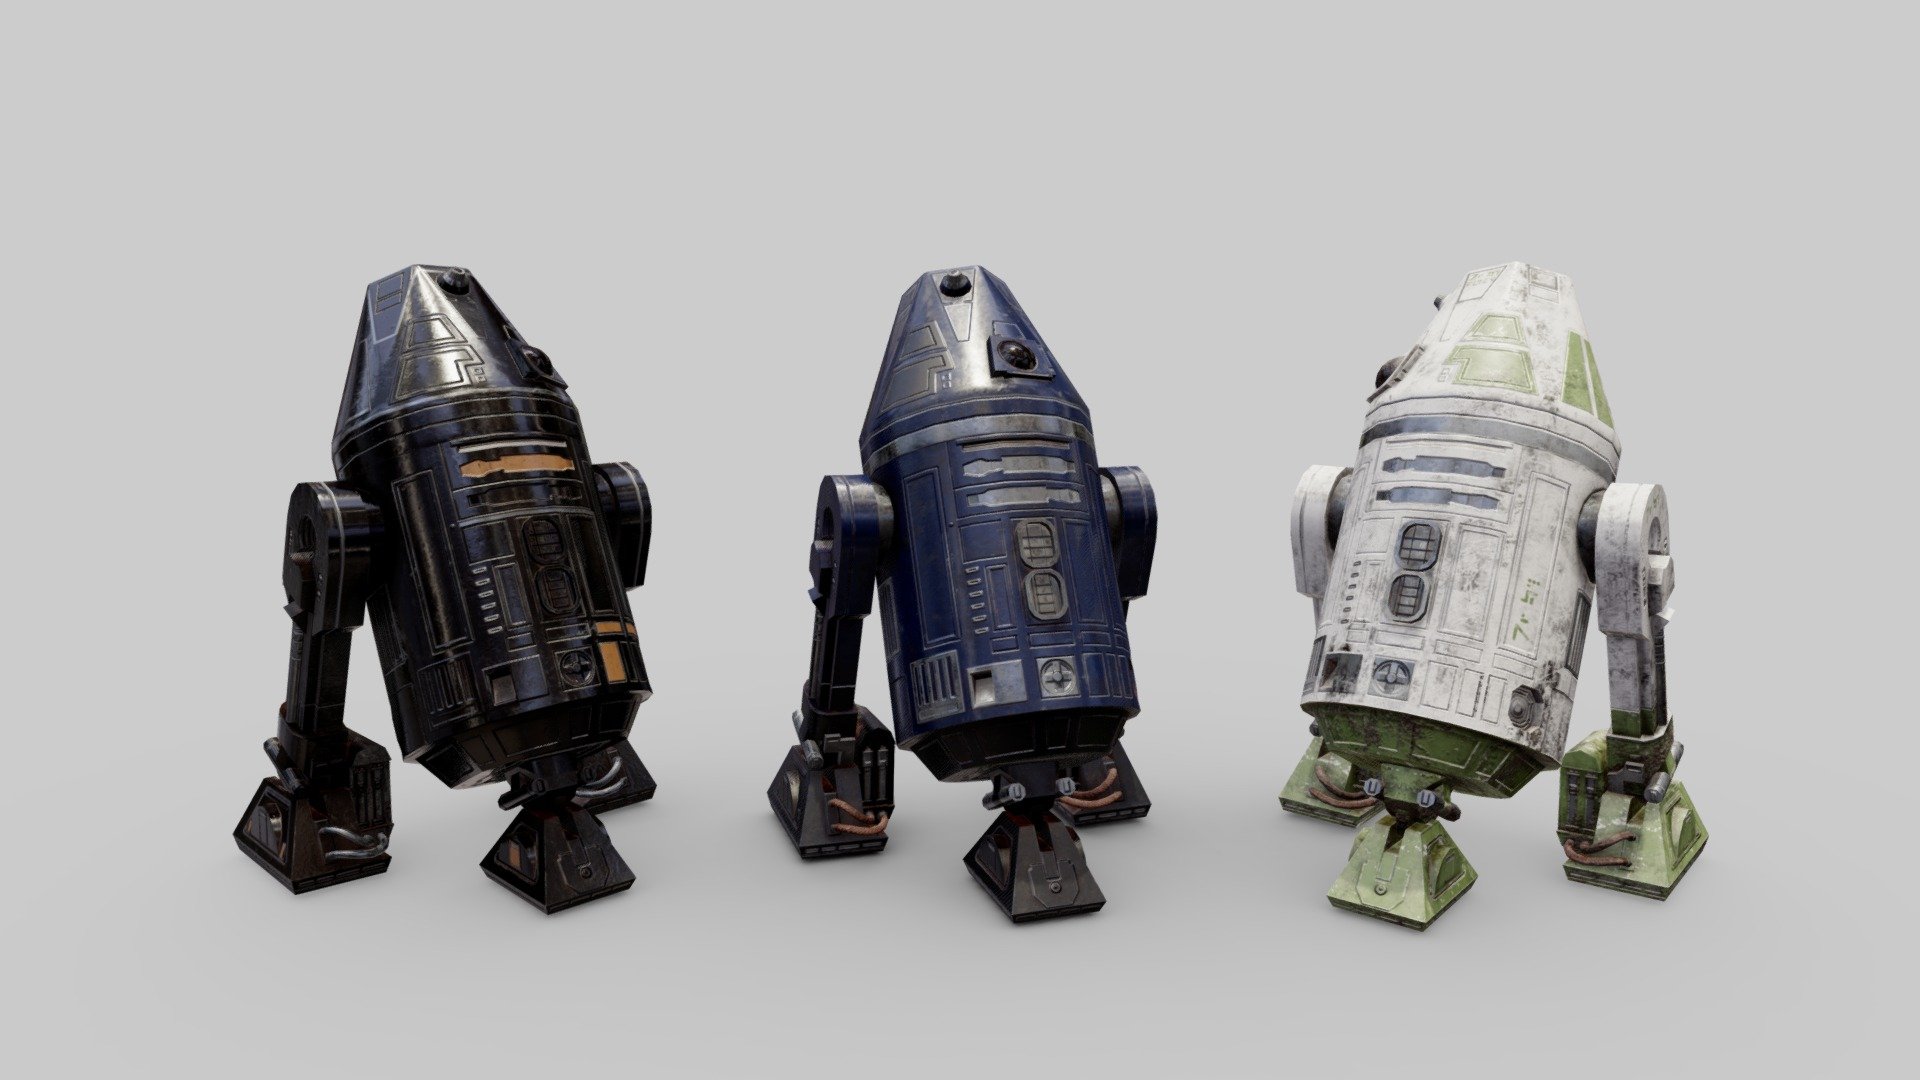 A low poly R4 droid, as seen in the background of many Star Wars movies. The black and dark blue colorschemes are based on background droids seen on the 1st and 2nd death stars, and the white/green is just a generic one. Very low poly. Not rigged but the different parts are parented correctly for easy posing. 

These are probably 85% accurate, not really detailed enough to be a hero asset, but certainly worthy of populating a scene, either in realtime or as a background character 3d model